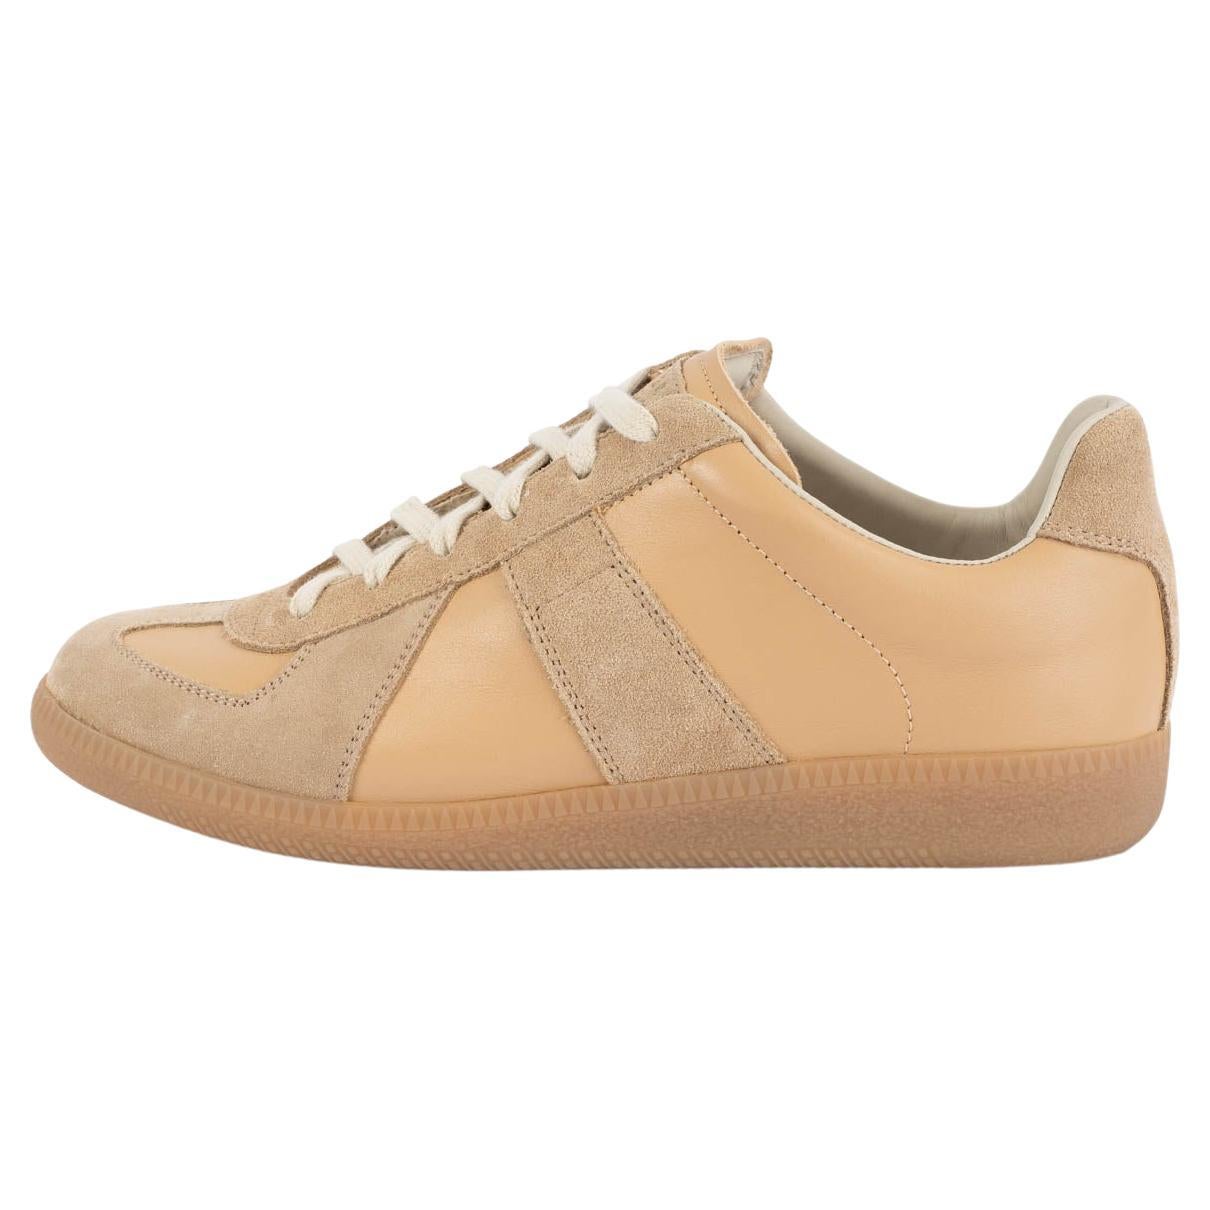 MAISON MARGIELA beige leather and suede REPLICA LOW TOP Sneakers